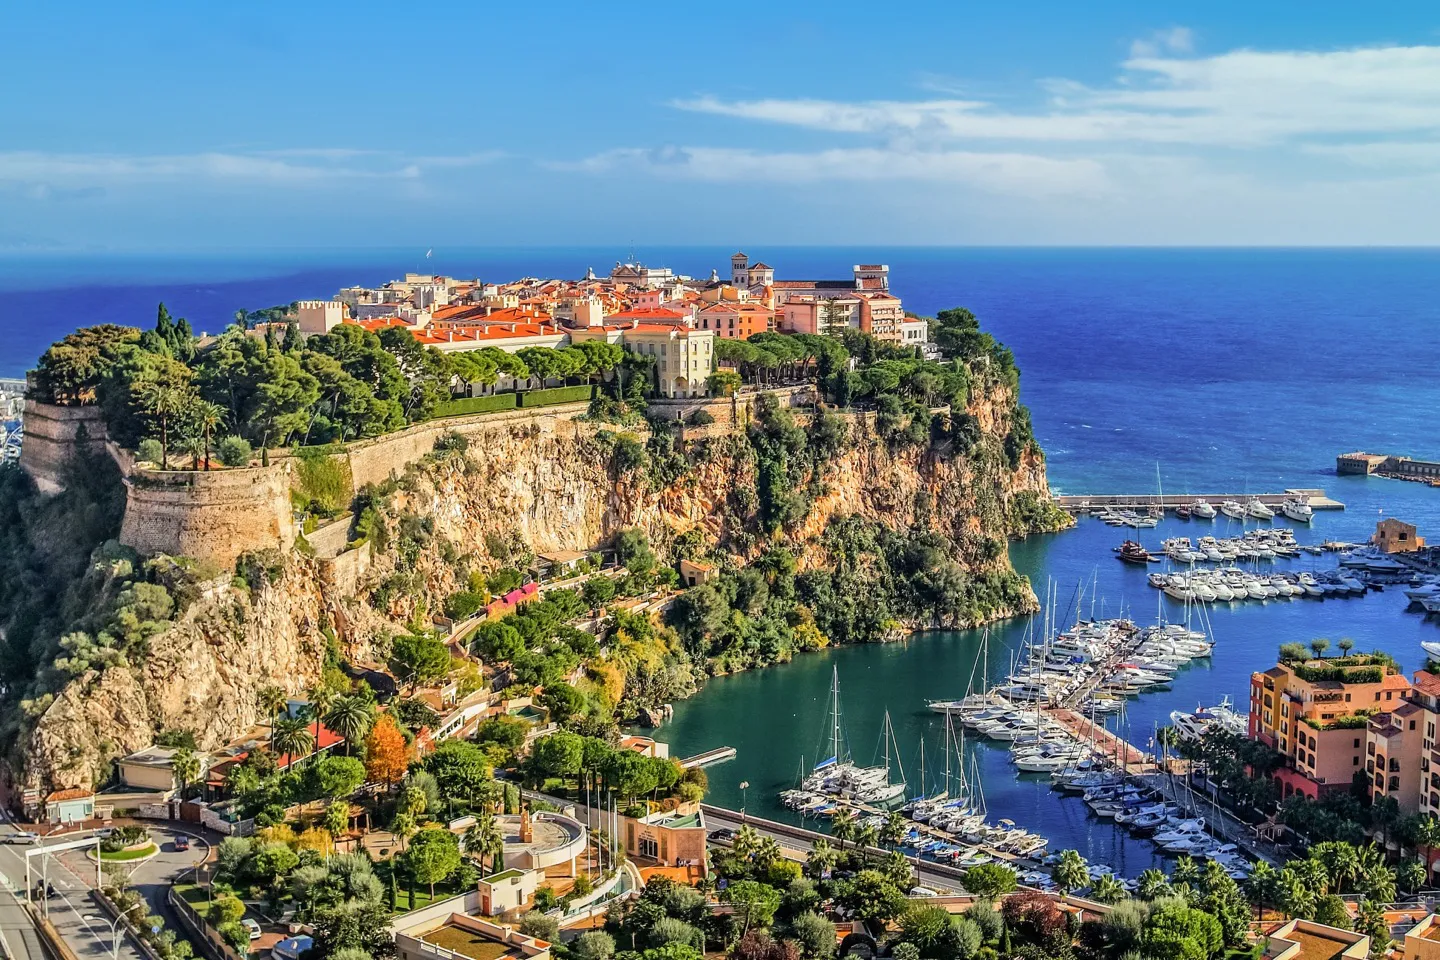 Visit Monaco, Nice and more on a romantic trip away with a luxury self drive tour of France